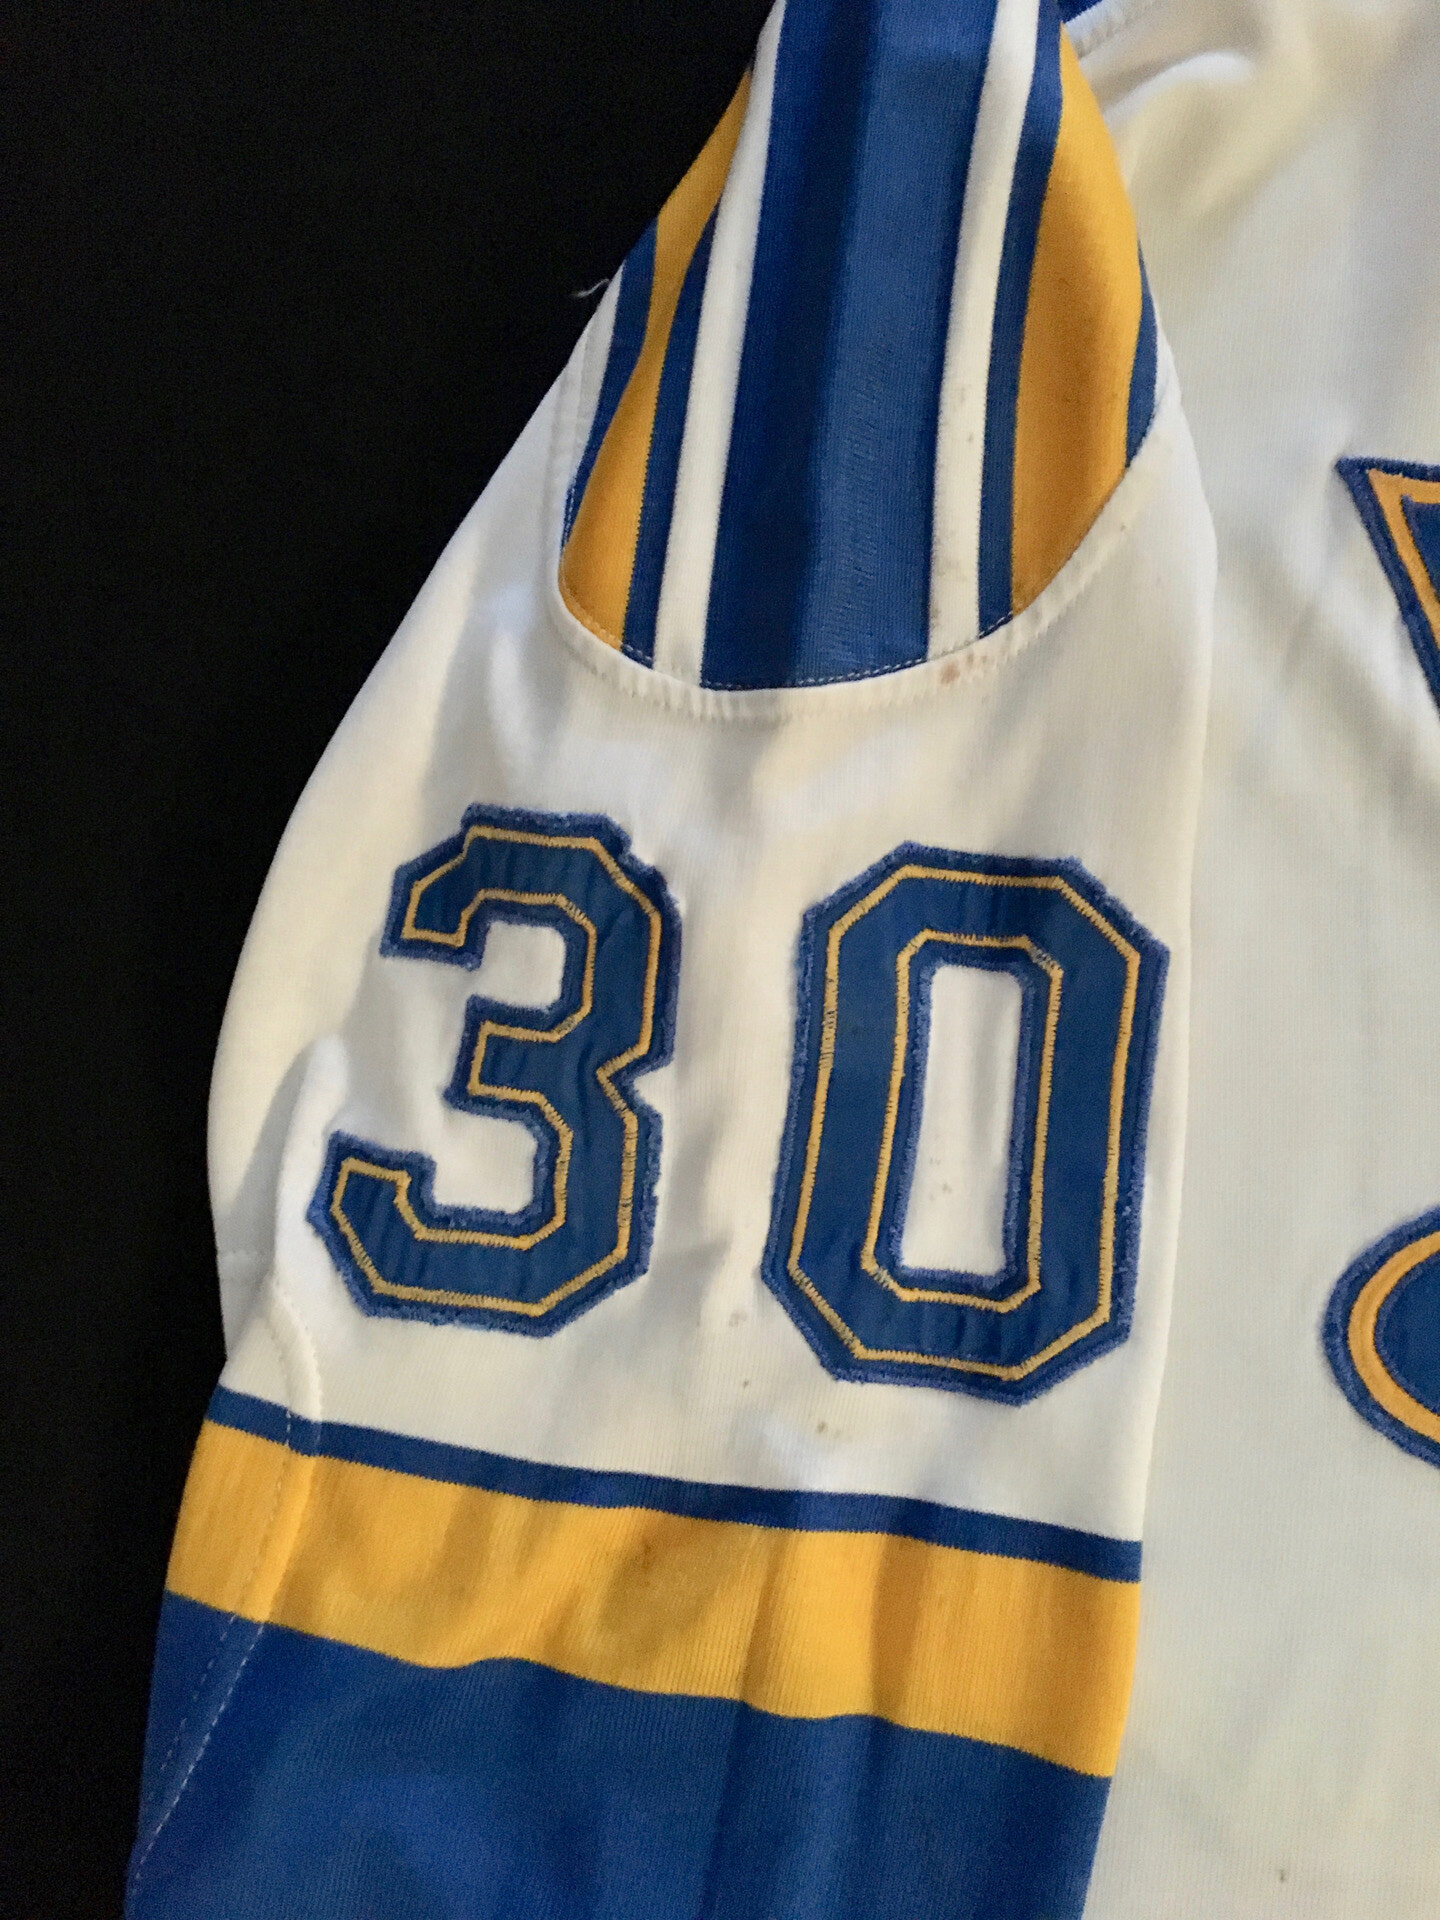 Taking Stock of a St. Louis Blues Game Worn Lawsuit